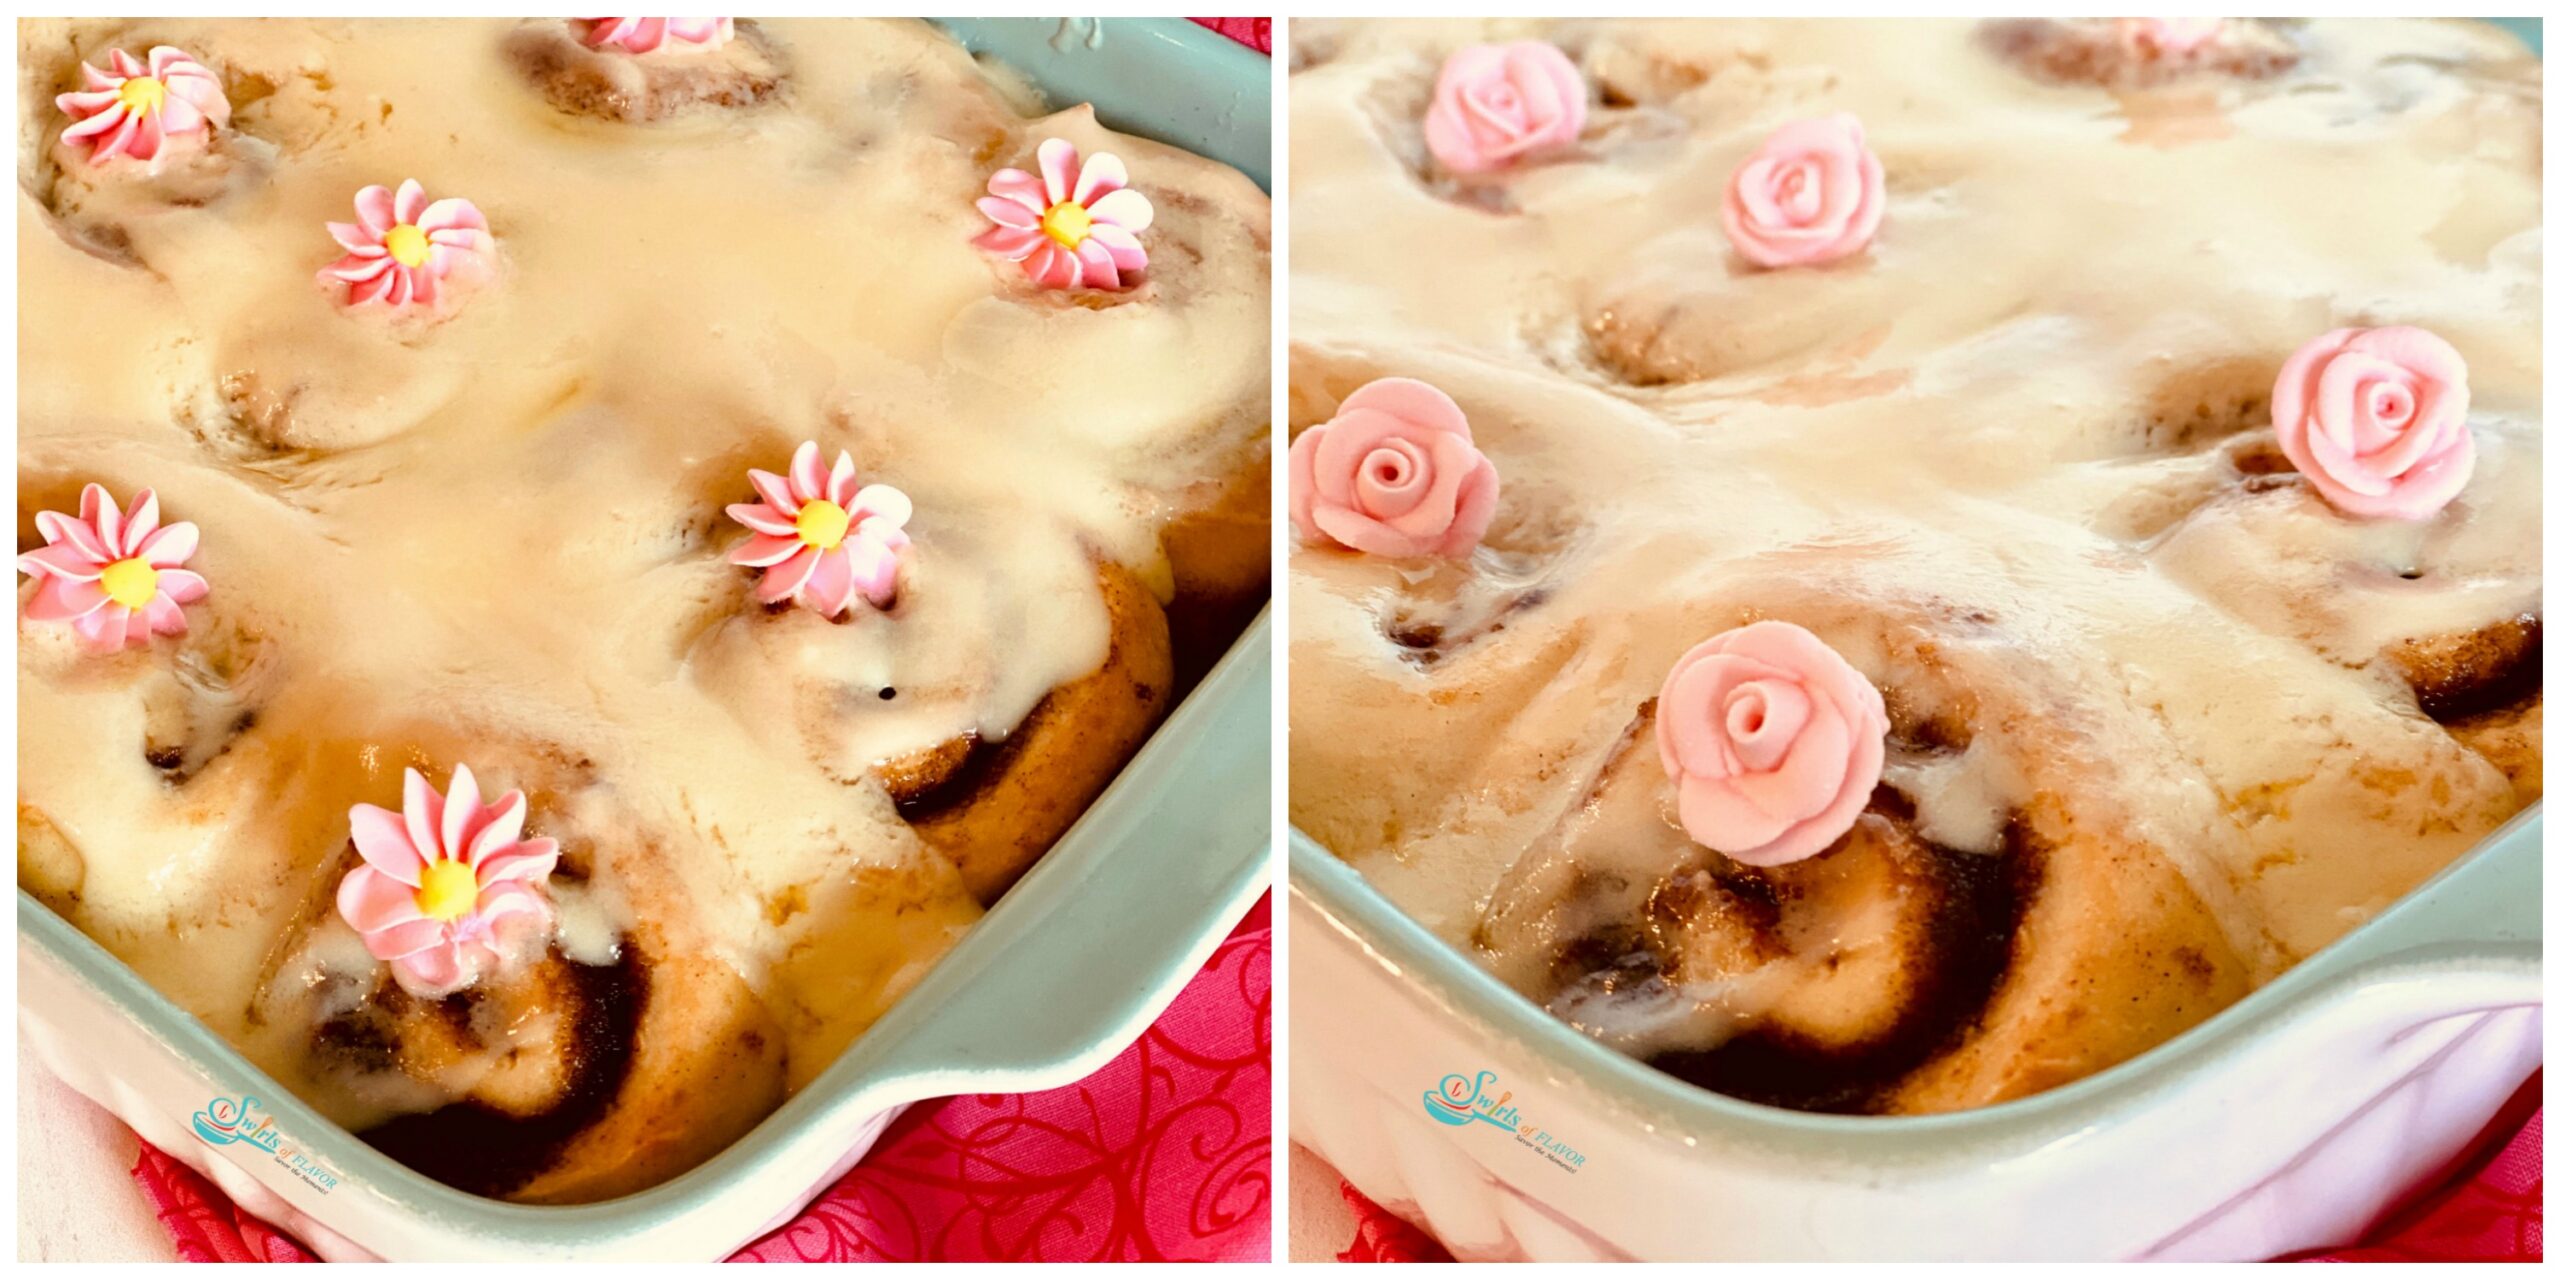 Cinnamon rolls decorated with sugar flowers